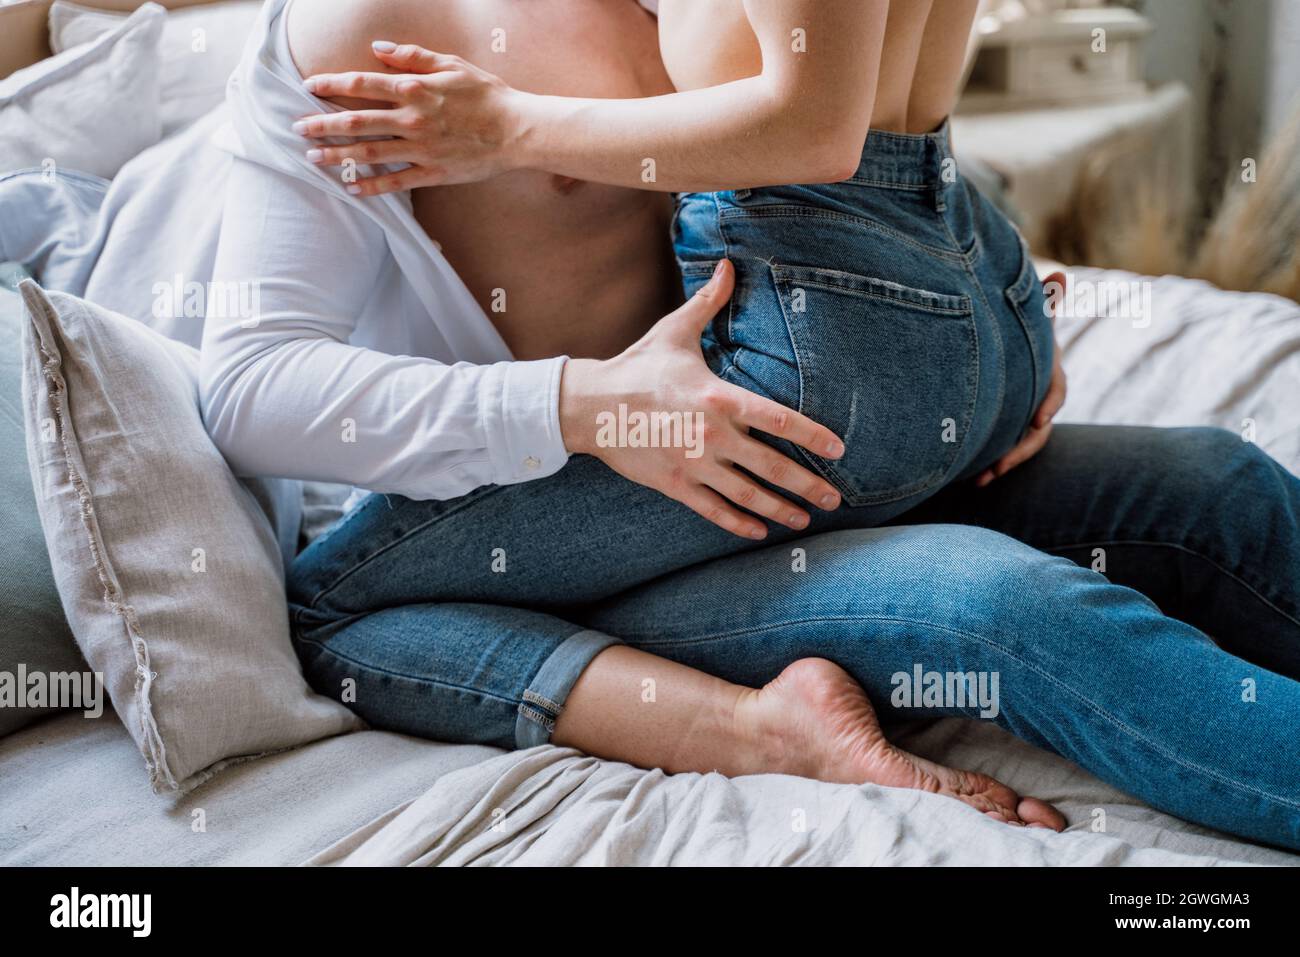 Midsection Of Couple Sitting On Bed At Home Stock Photo